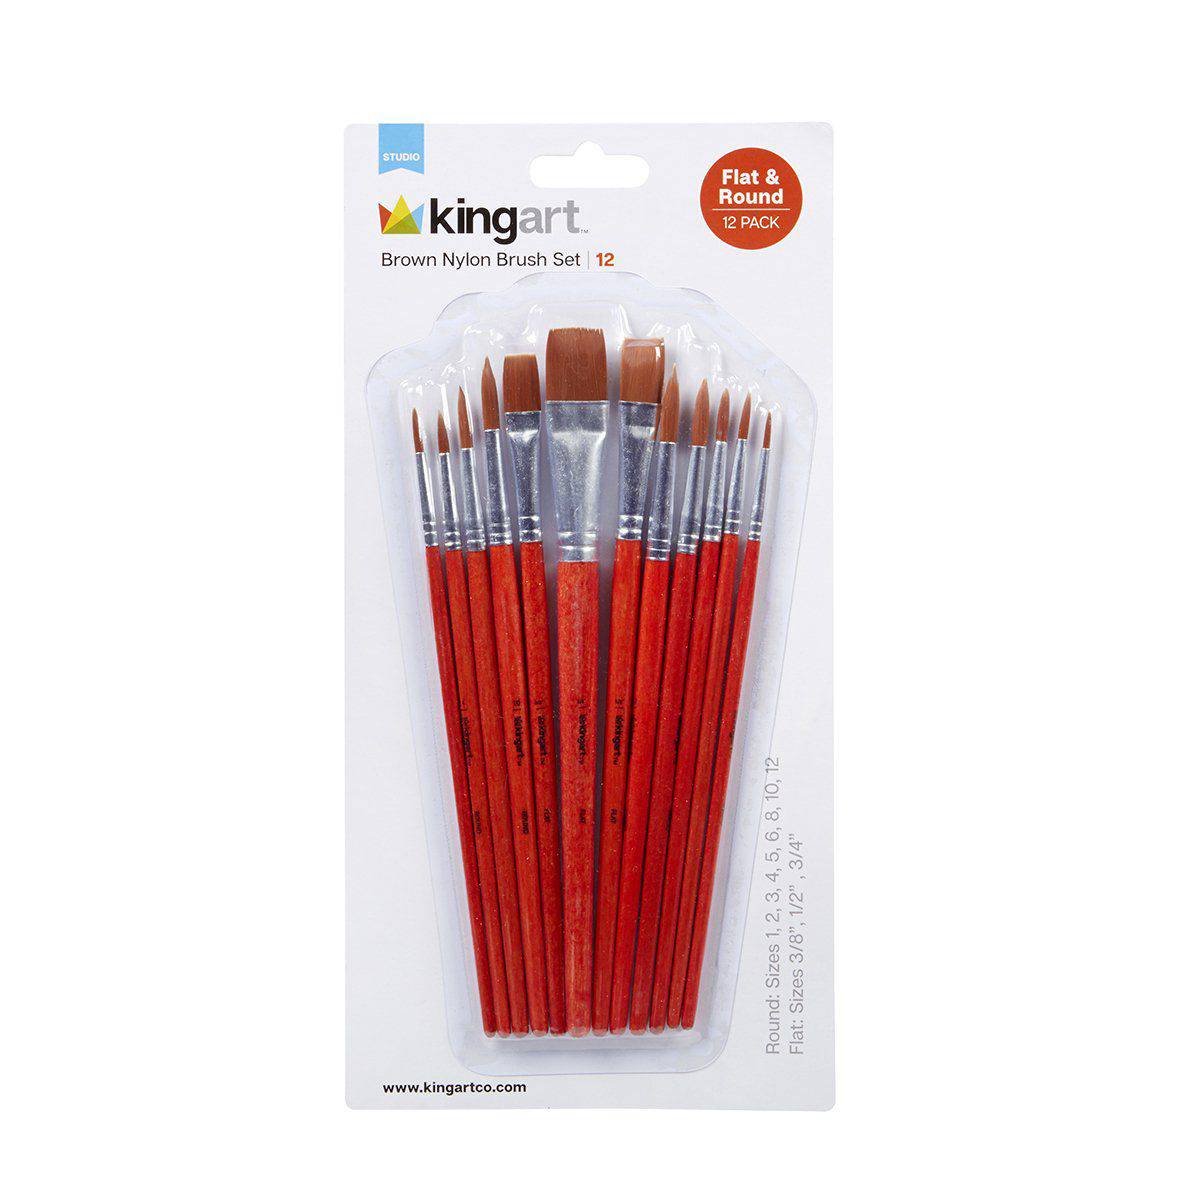 Fine Tip Detail Paint Brushes  12 pc Thin & Small Paint Brush Set